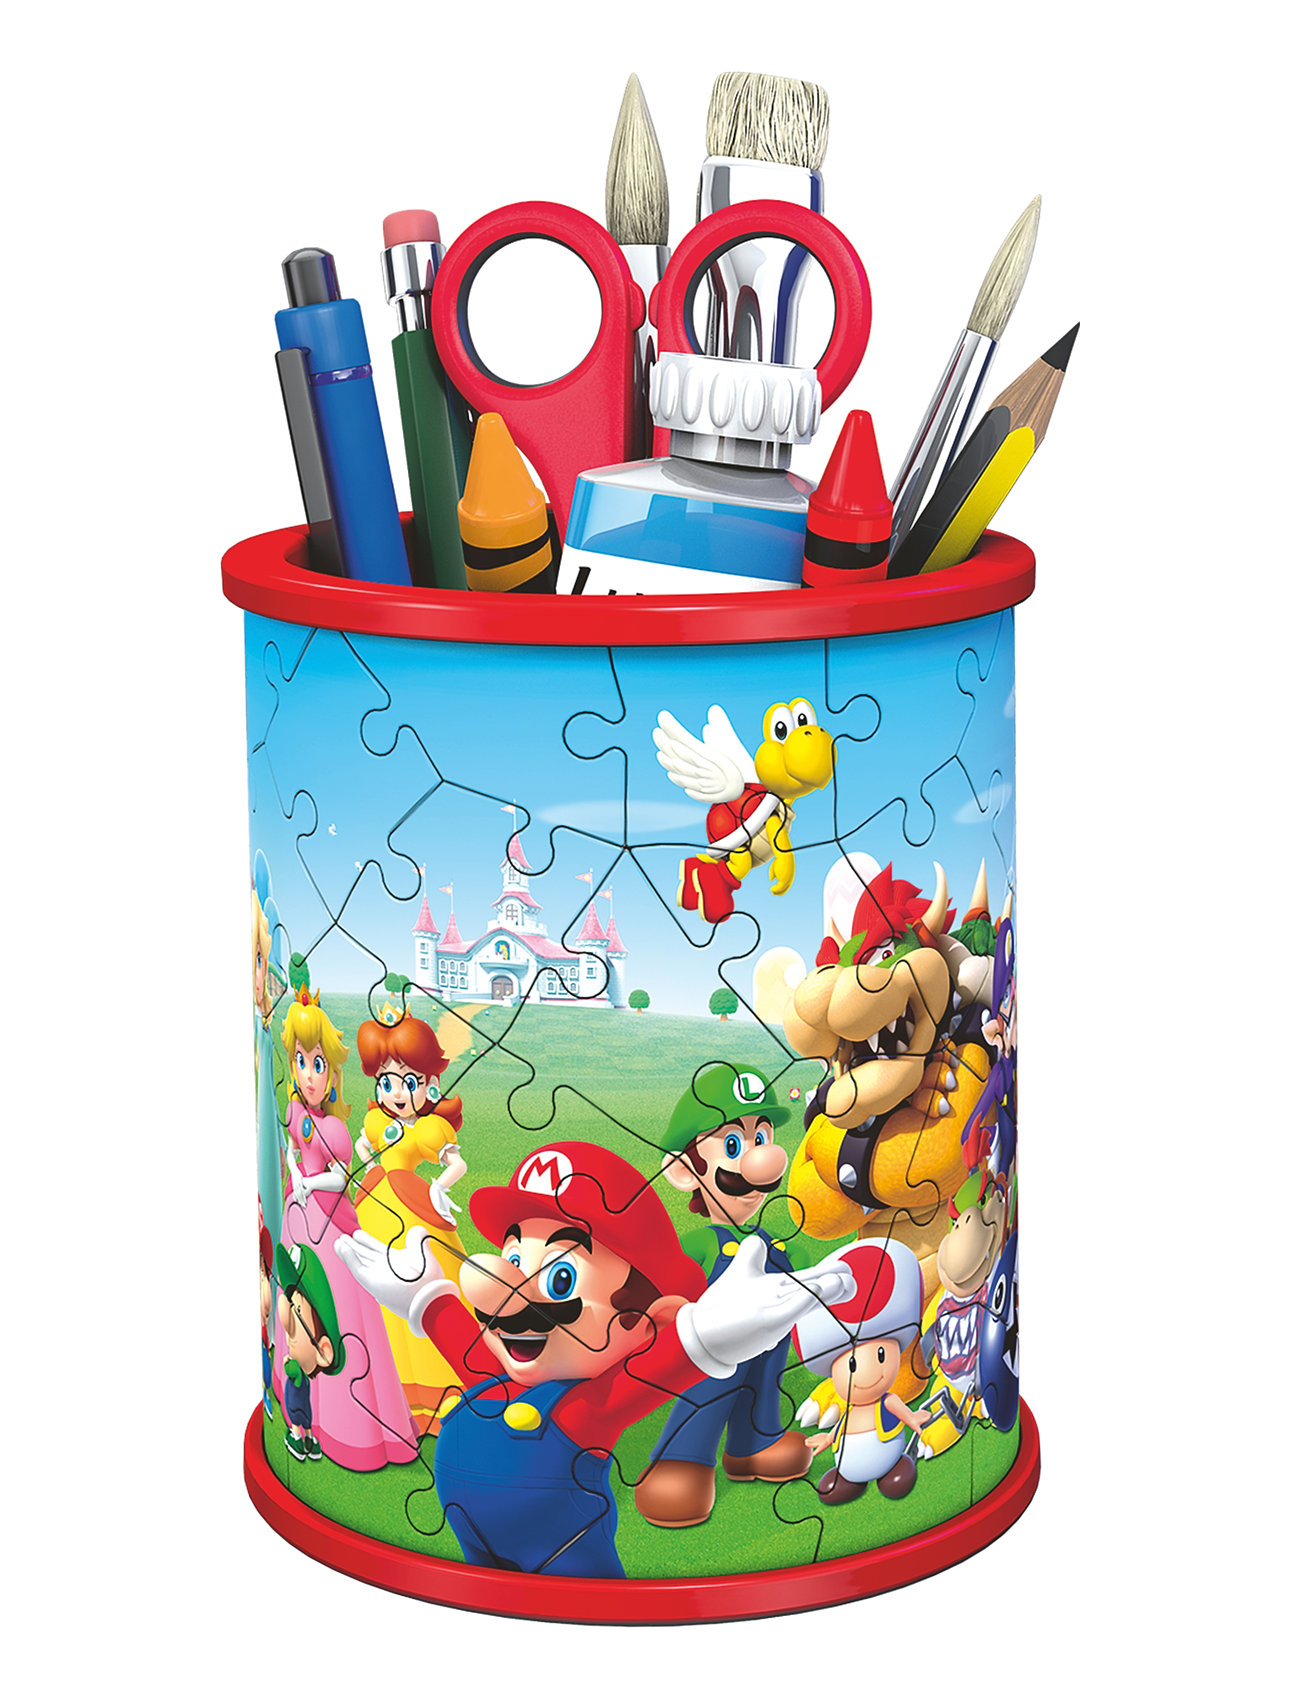 Super Mario Pencil Cup 54P Toys Puzzles And Games Puzzles 3d Puzzles Multi/patterned Ravensburger